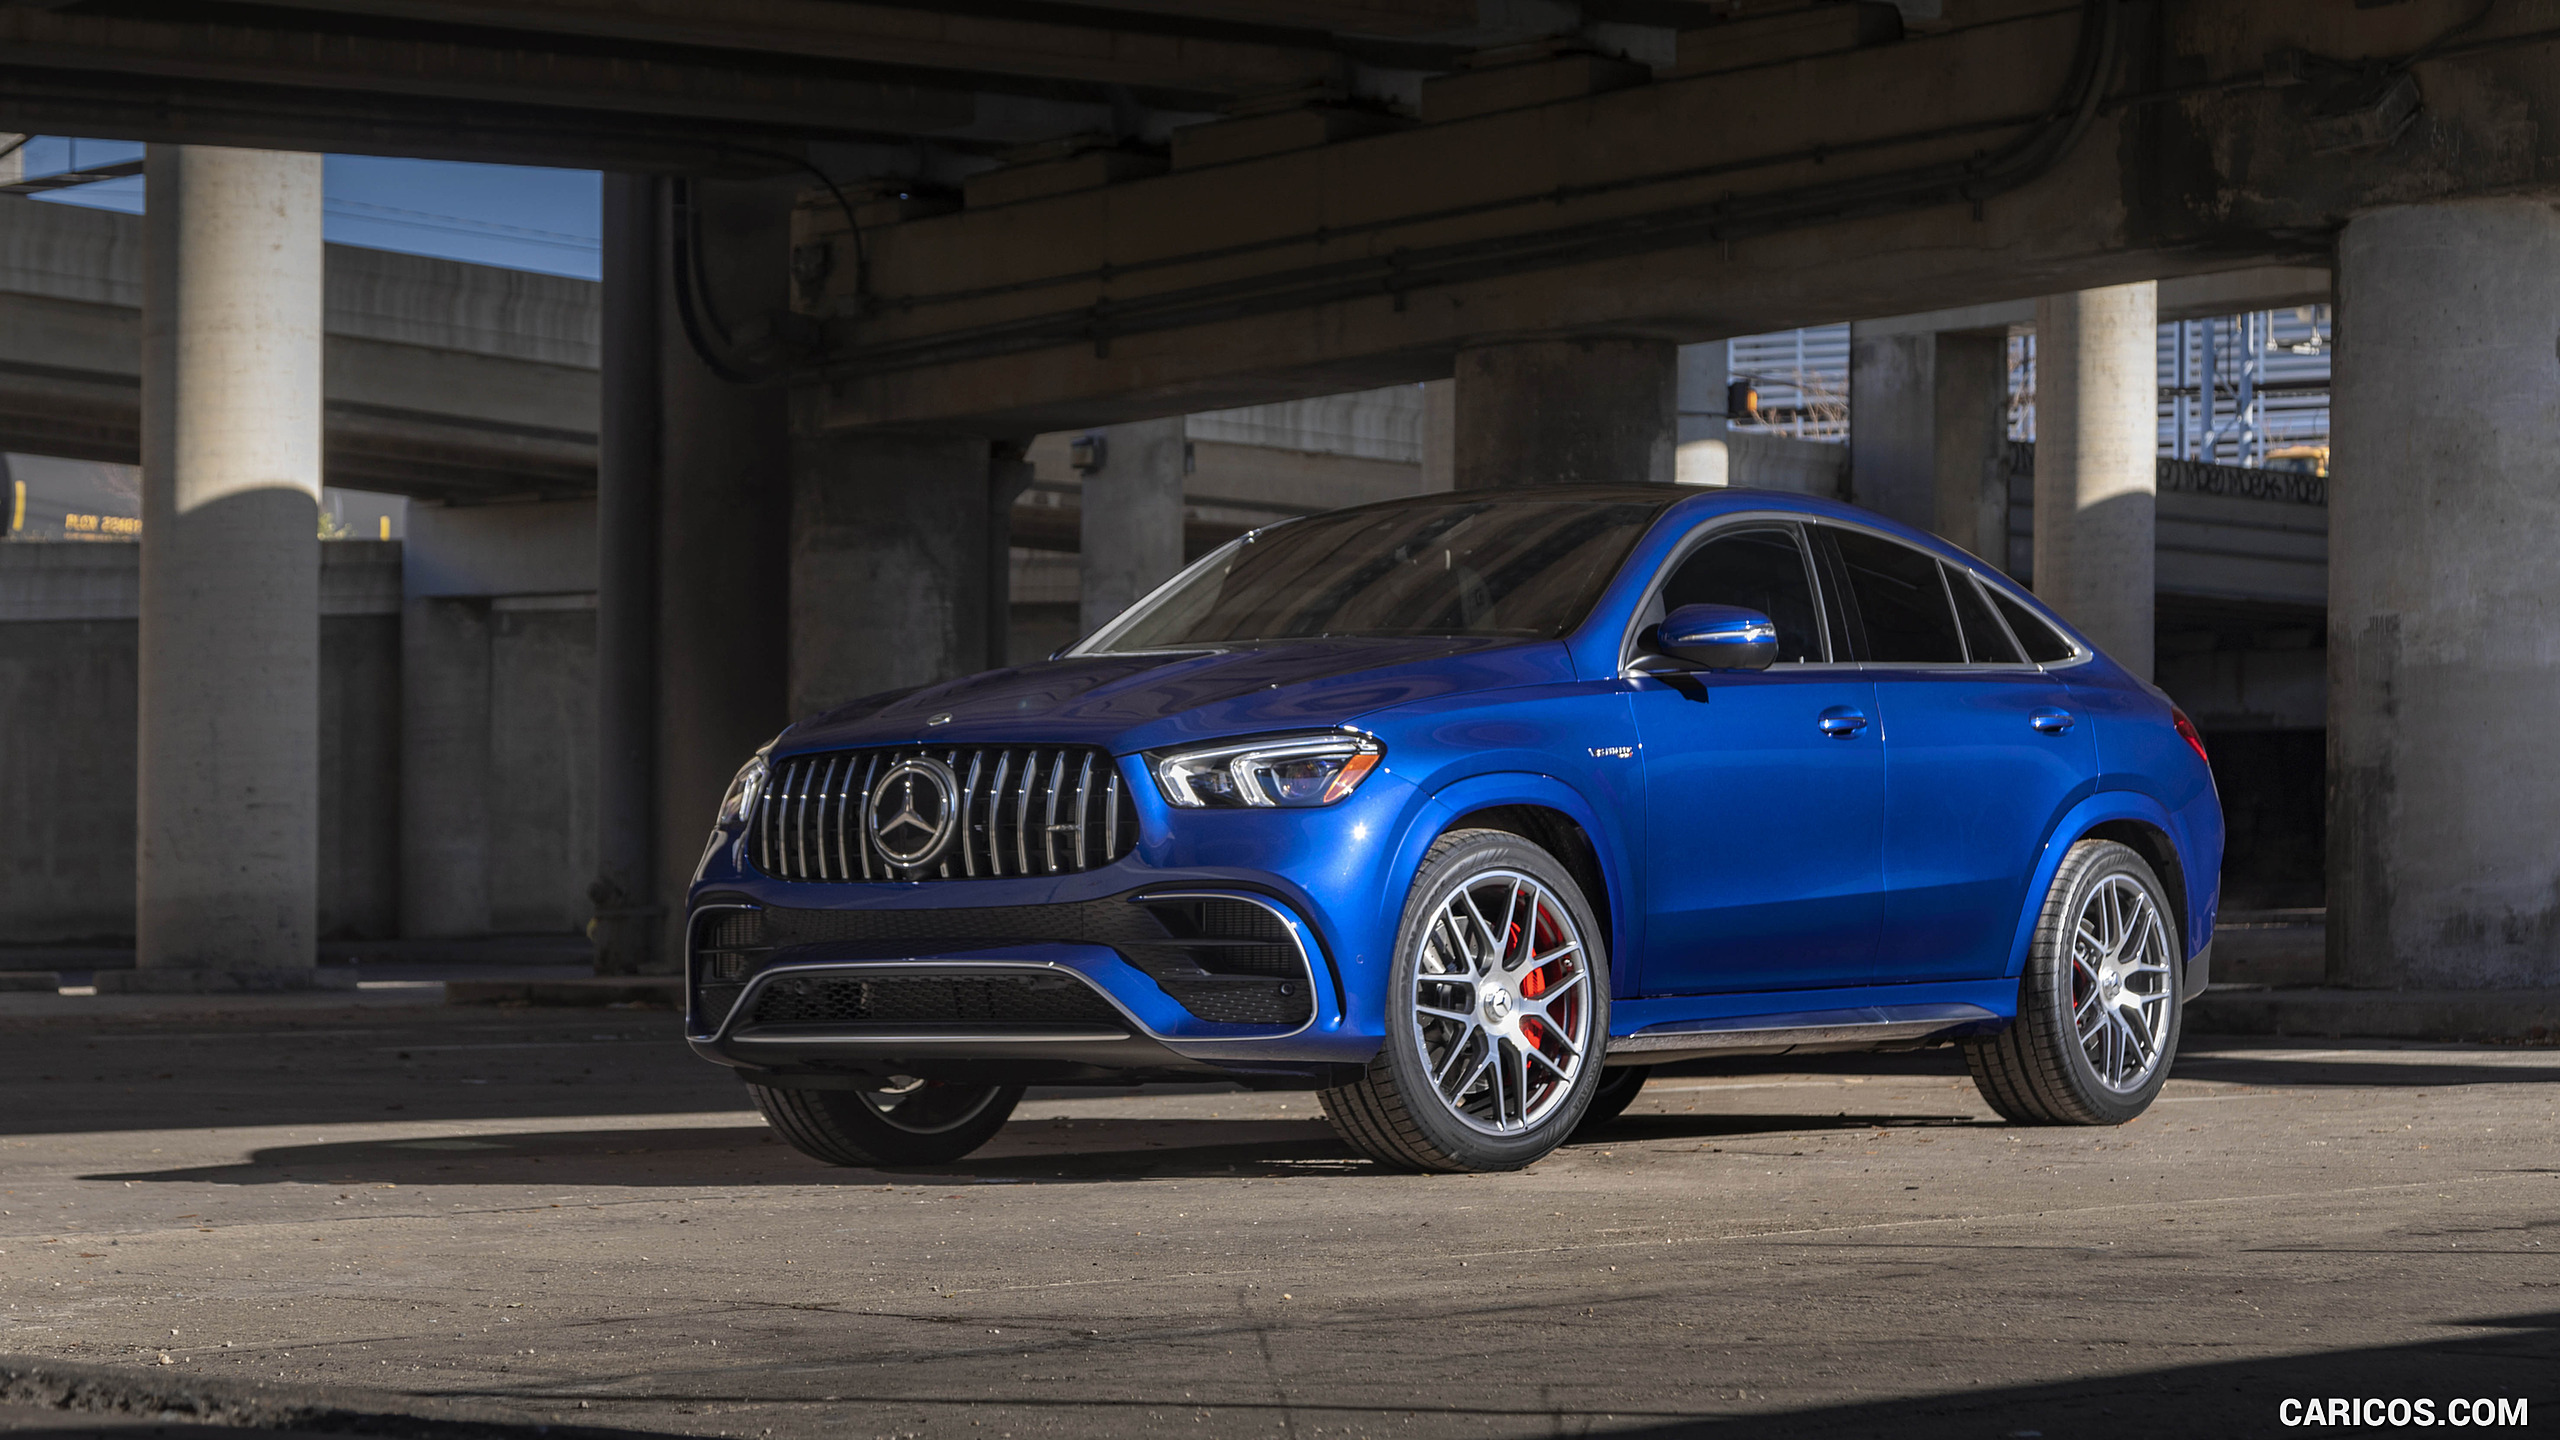 2021 Mercedes-AMG GLE 63 S Coupe (US-Spec) - Front Three-Quarter, #41 of 66